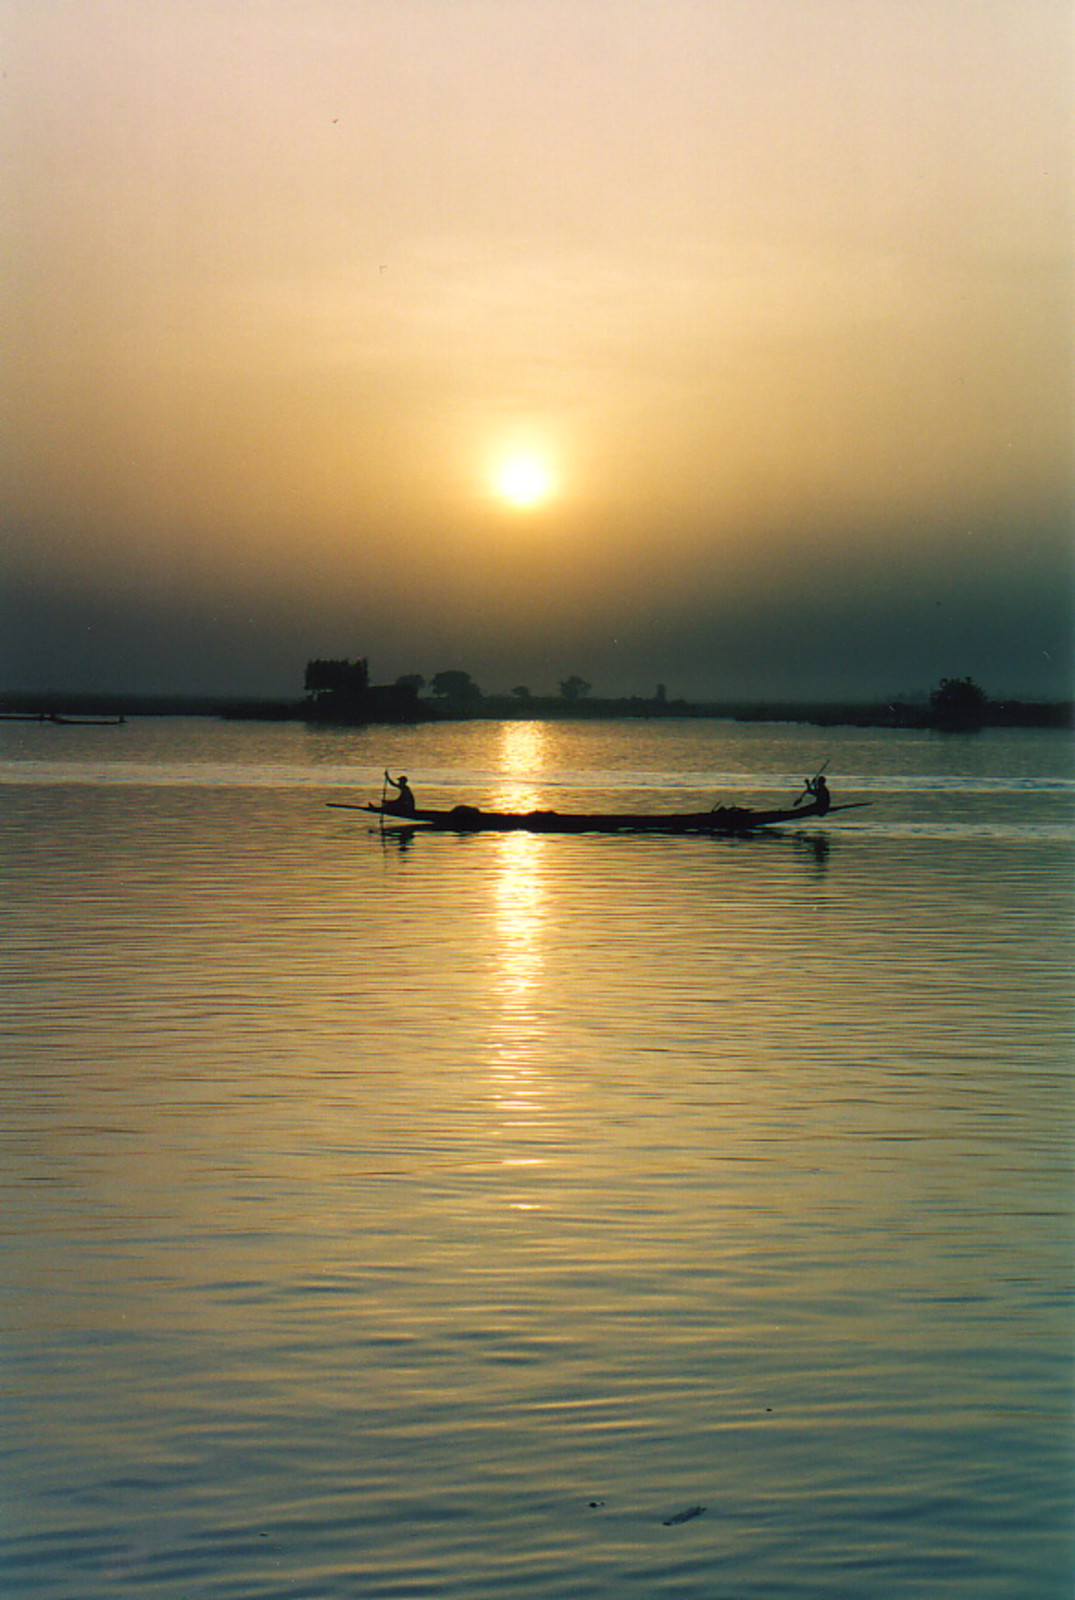 Sunset over the River Niger